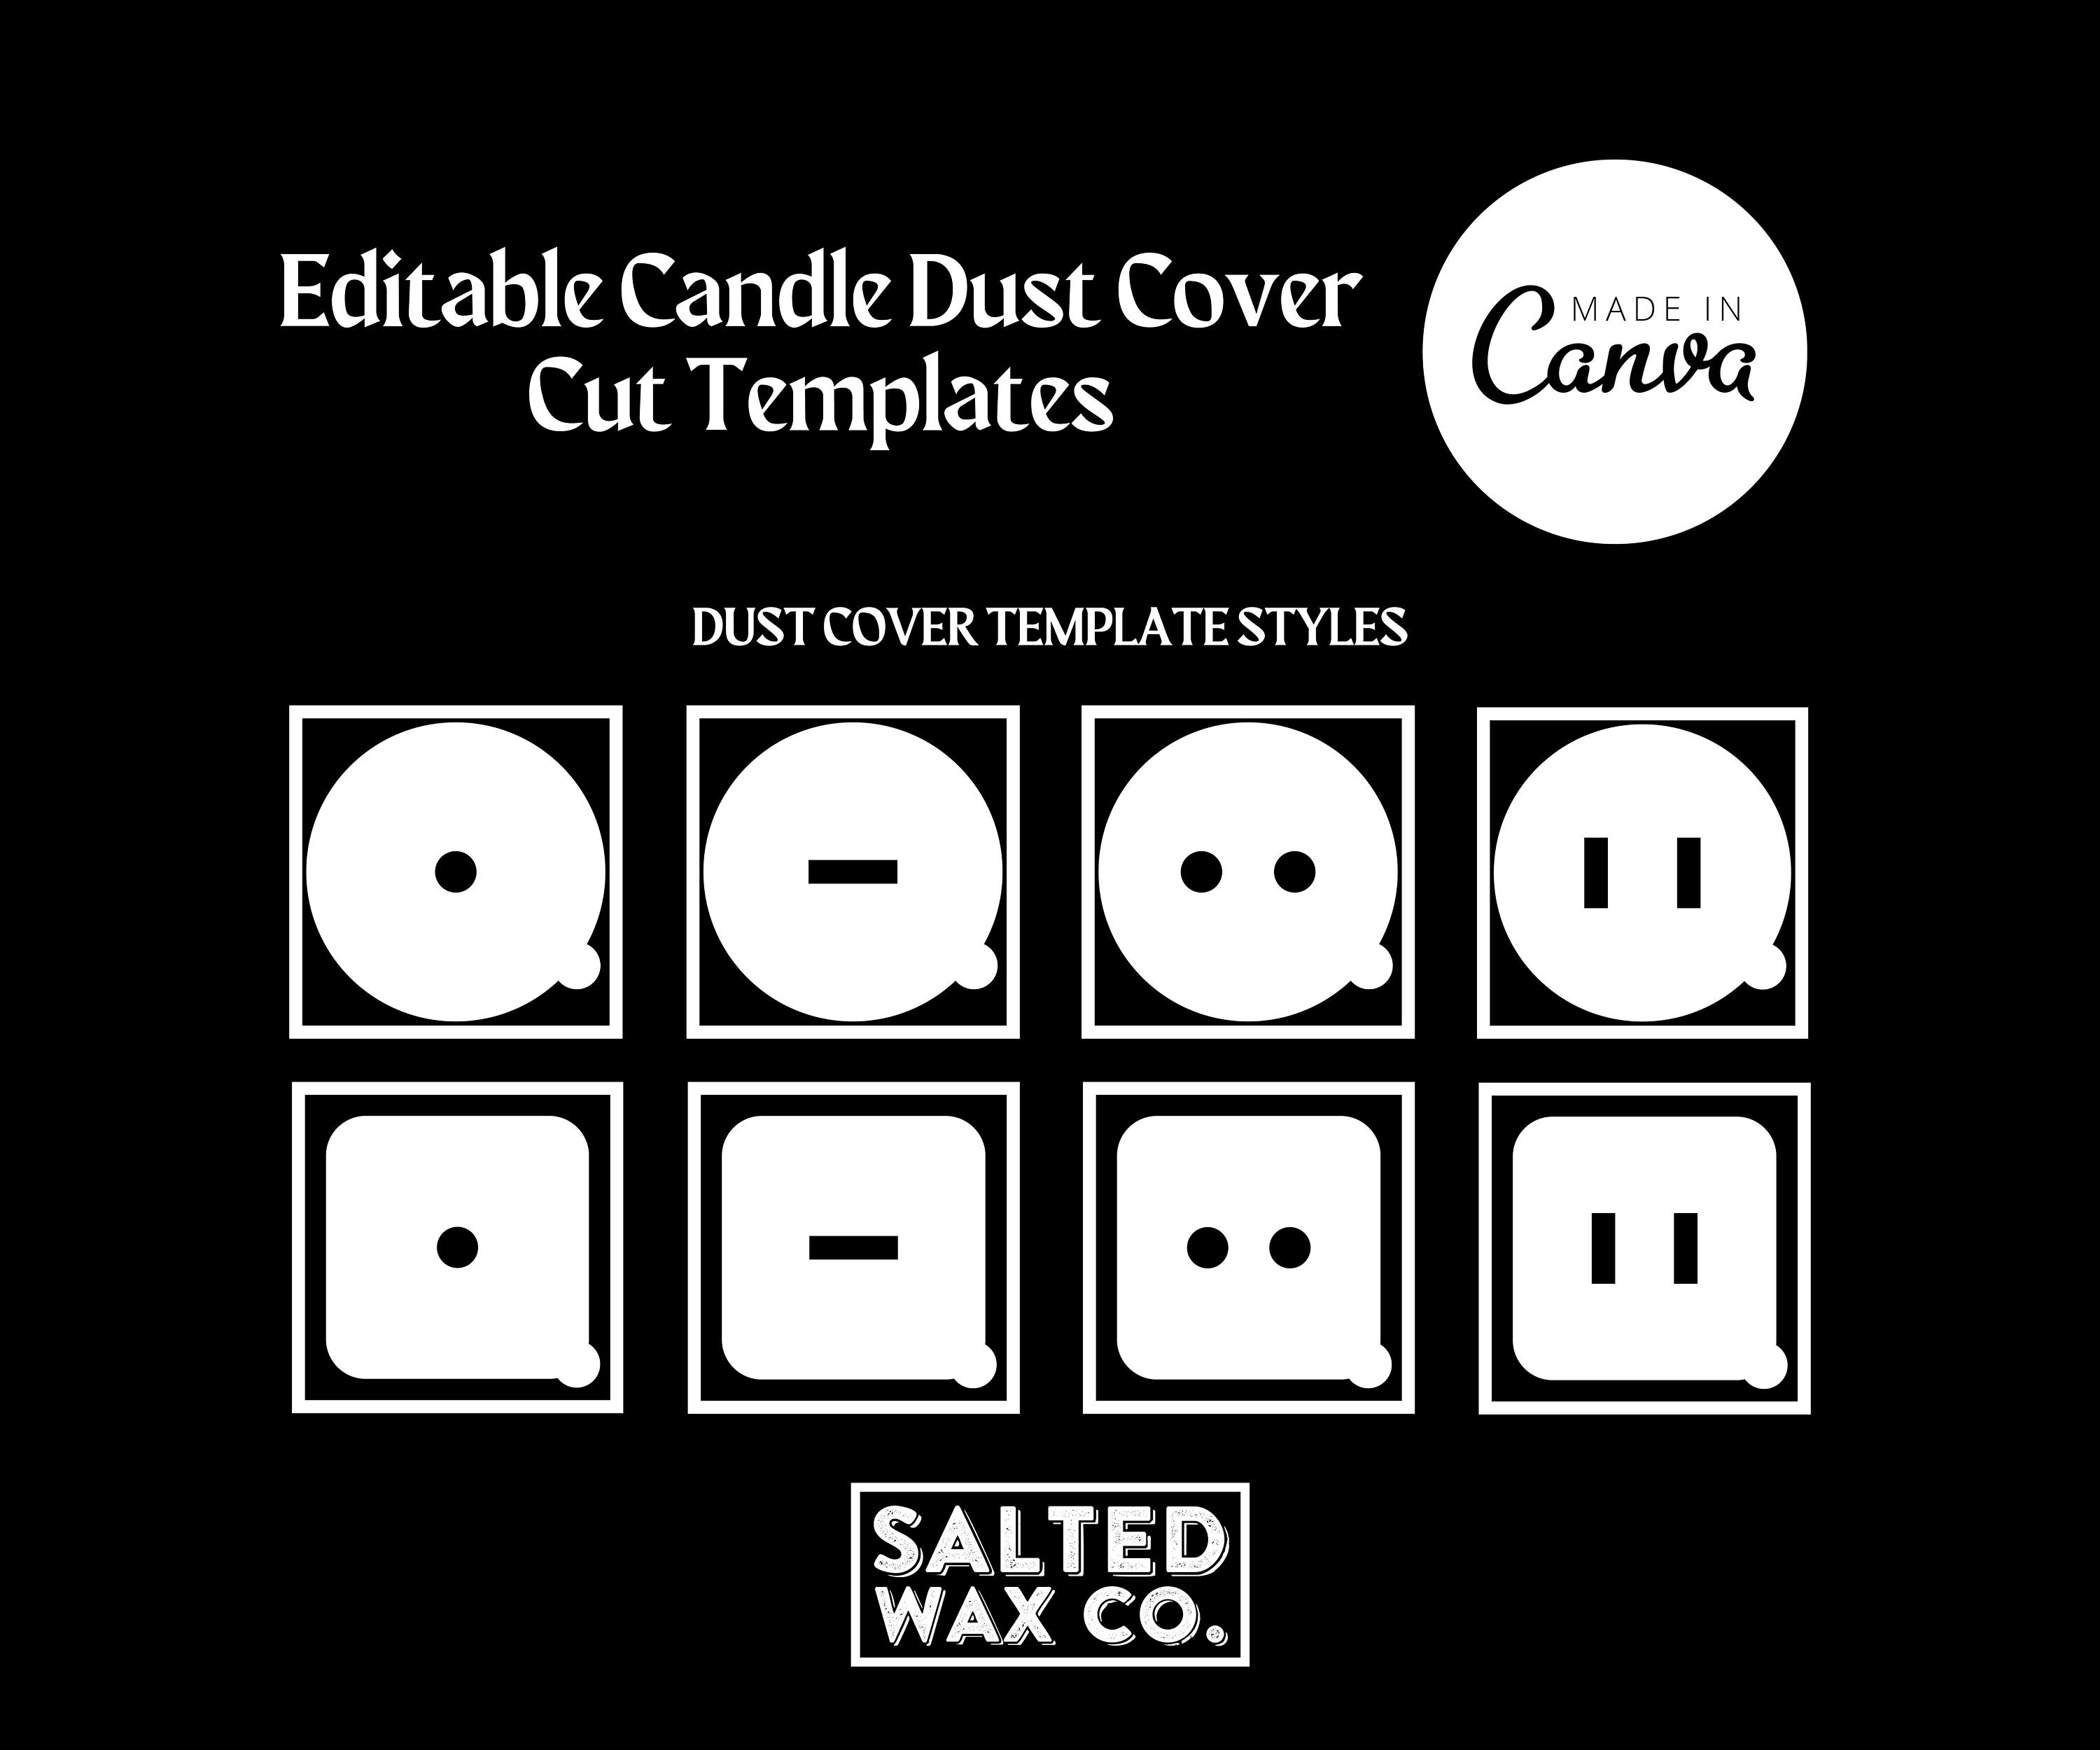 Candle Dust Cover Template / Editable Candle Dust Cover / Canva Template /  Cricut Dust Cover / Dust Cover for Cricut Design Space / 7.5cm 